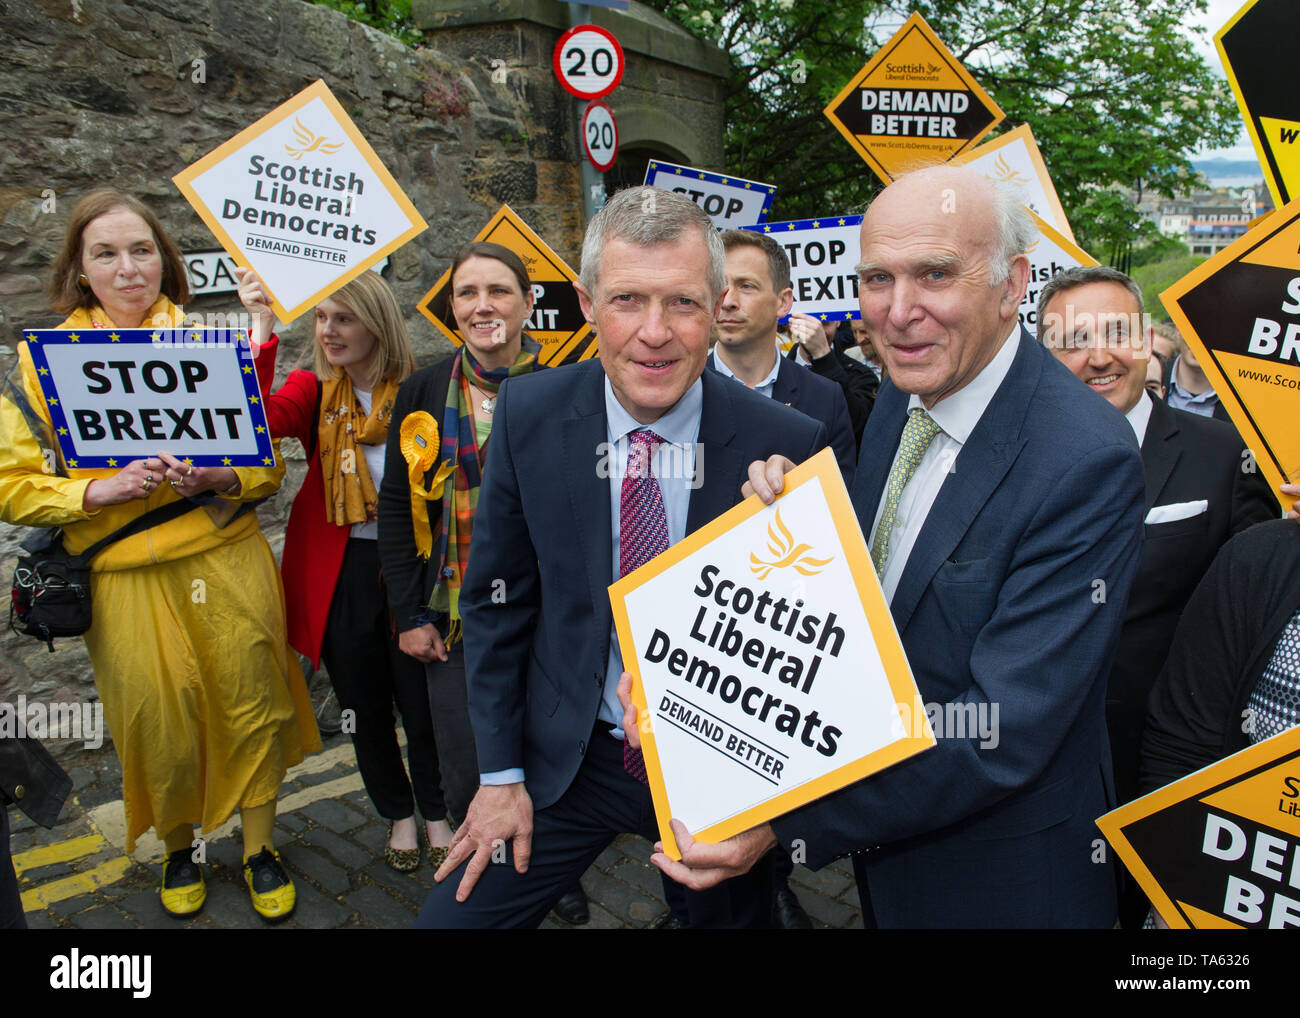 Edinburgh, UK. 22 May 2019. On the eve of the European elections Liberal Democrat Leader Vince Cable rallies activists and campaigners in Edinburgh. At the start of a day-long UK-wide tour Vince Cable will say that Liberal Democrats are set to make gains, including in Scotland, as the strongest party of Remain in the UK. Credit: Colin Fisher/Alamy Live News Stock Photo